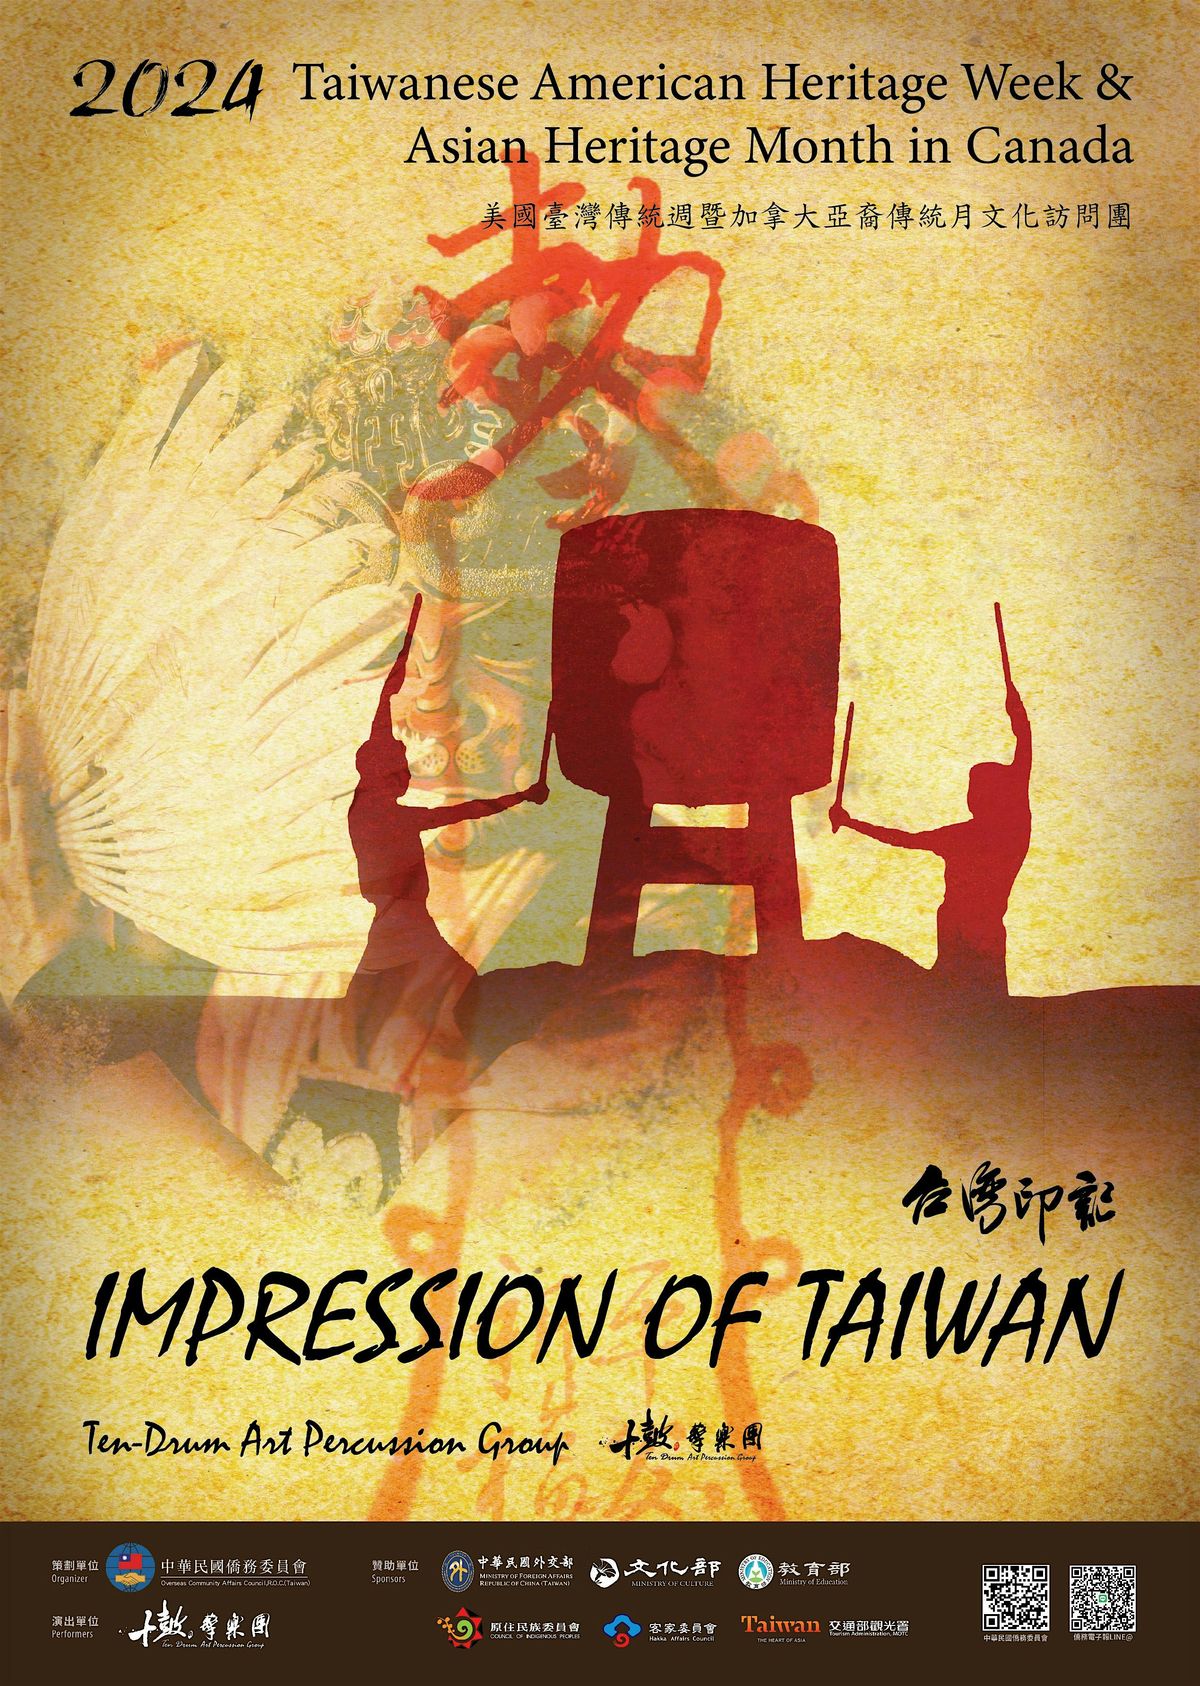 Impression of Taiwan by Ten-Drum Art Percussion Group - free!